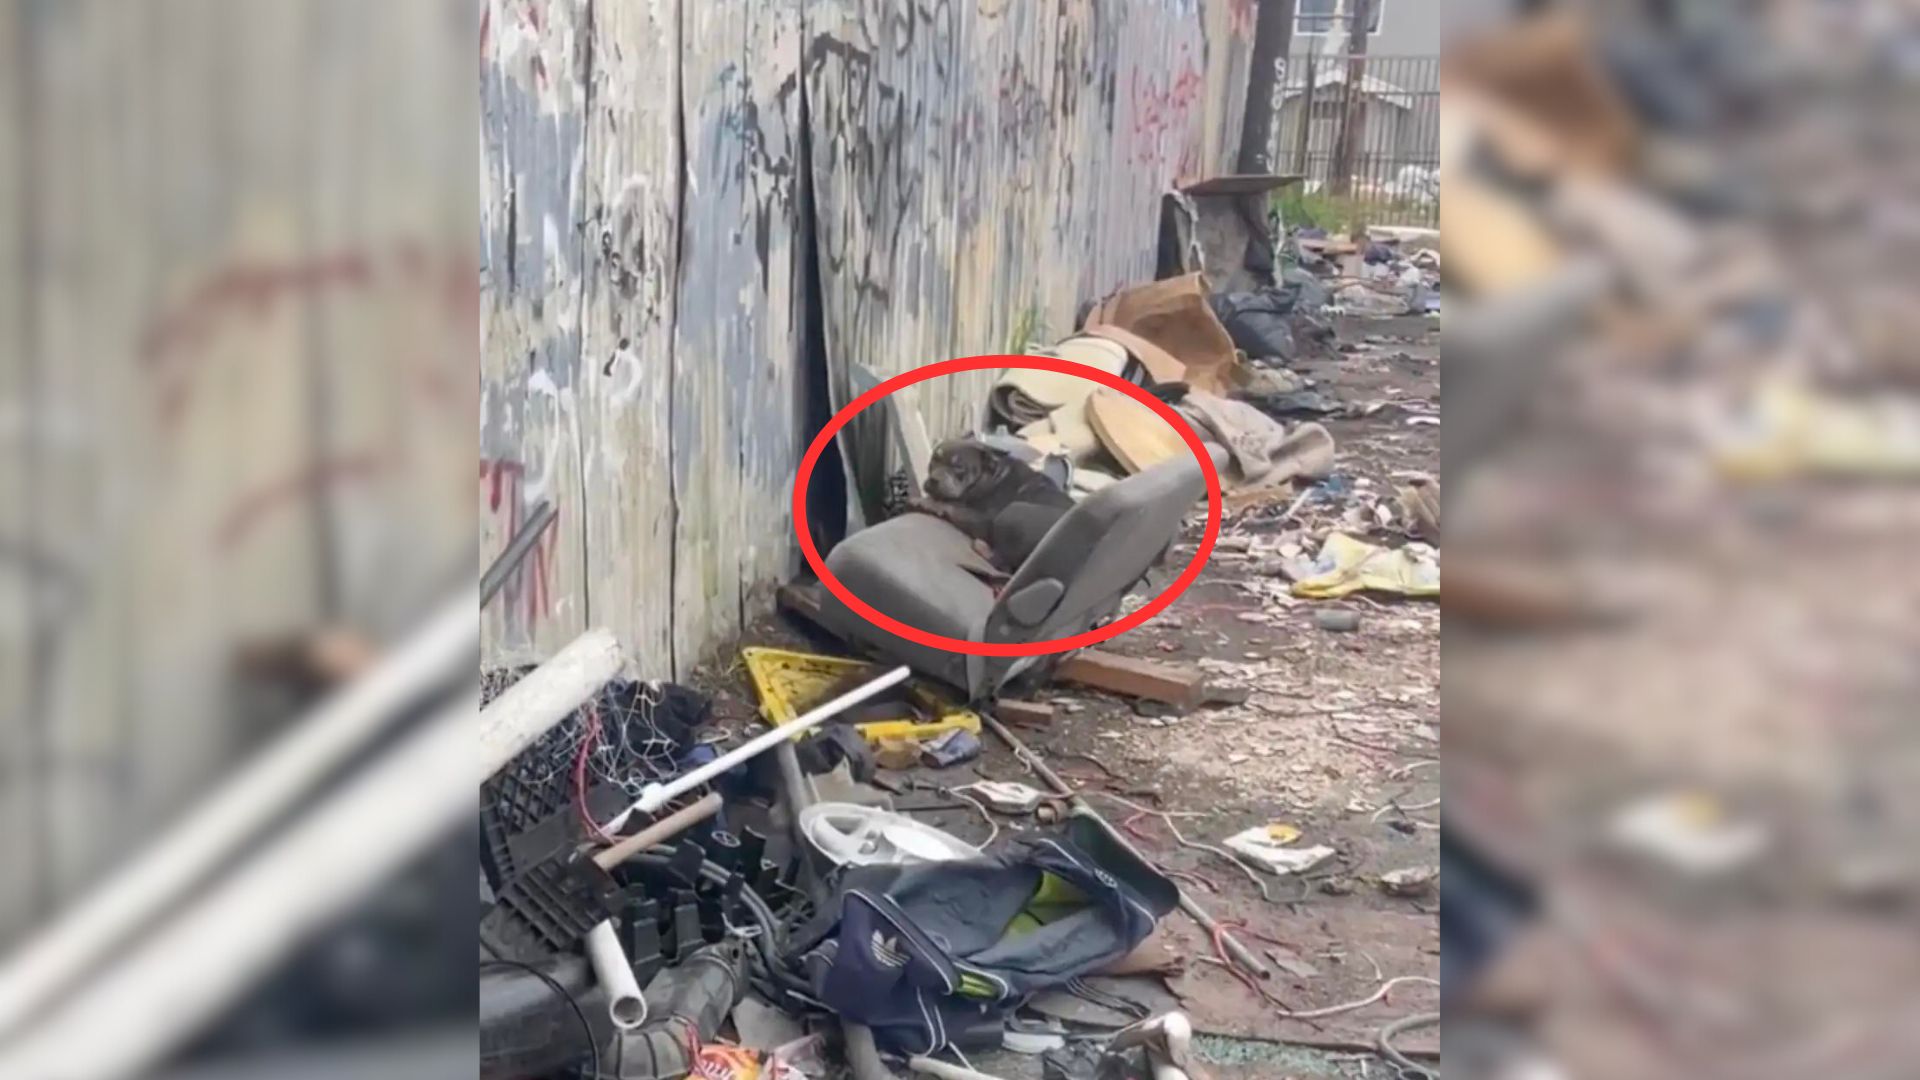 Rescuers Found A Dog On Pile Of Garbage Only To Realize She Also Has Another Surprise